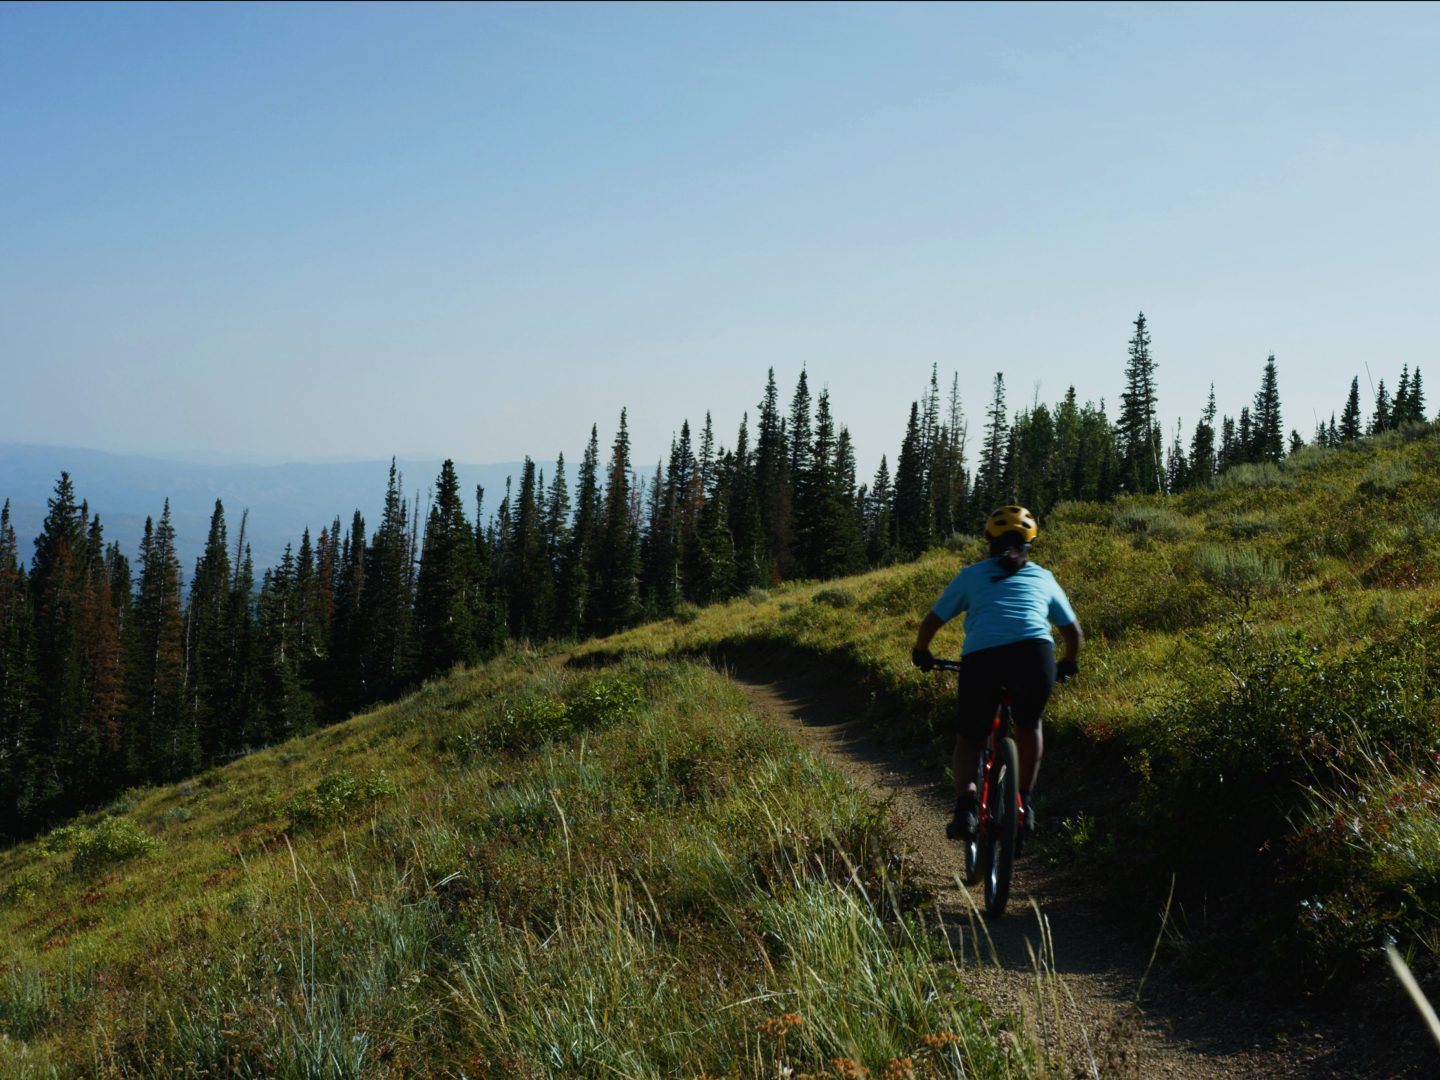 Genesis rides away from the camera on a green mountain side, towards large pine trees.